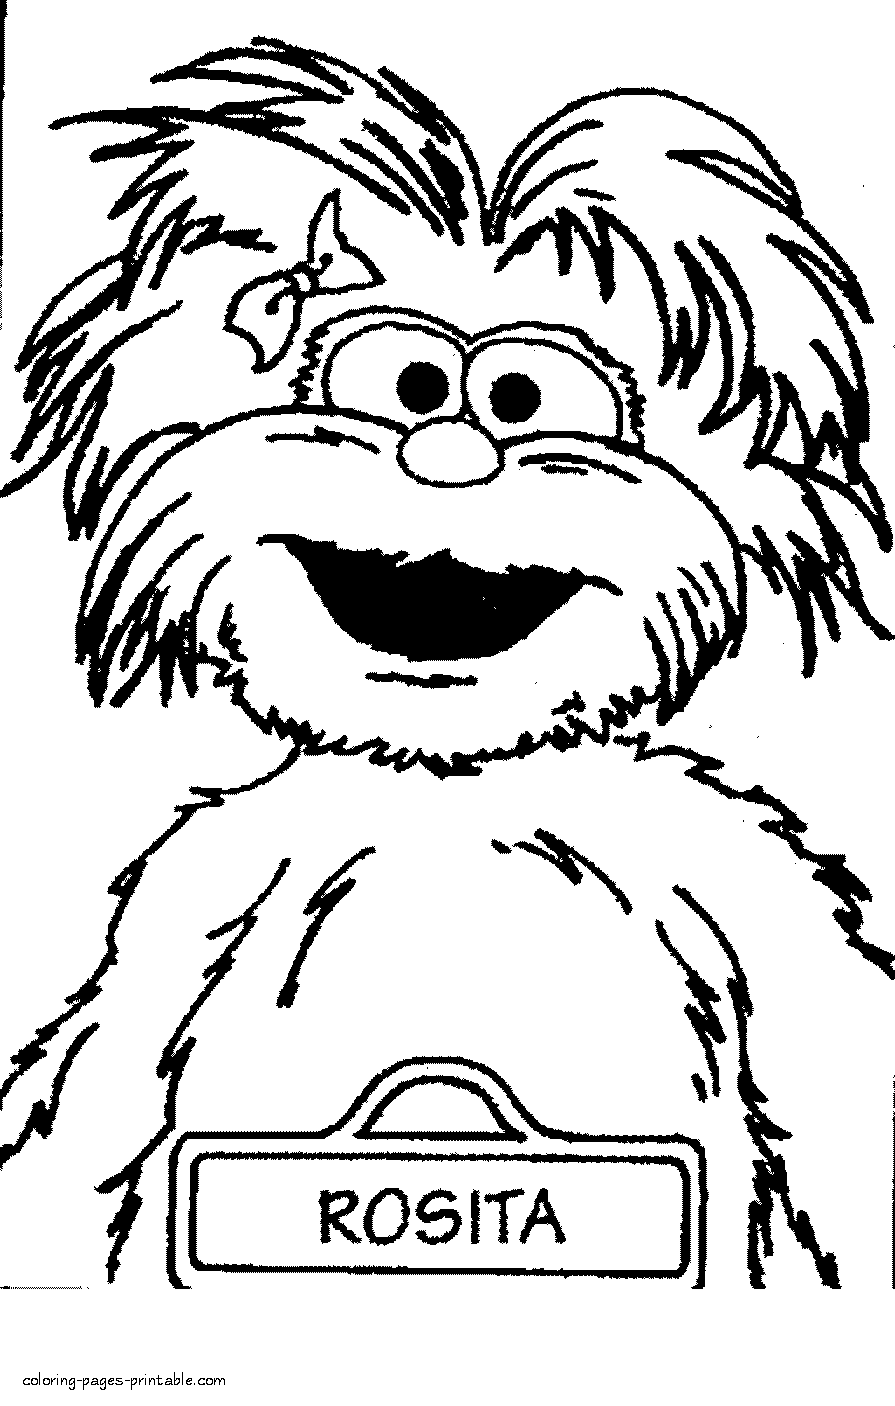 Sesame Street Coloring Pages Big Bird Coloring Pages